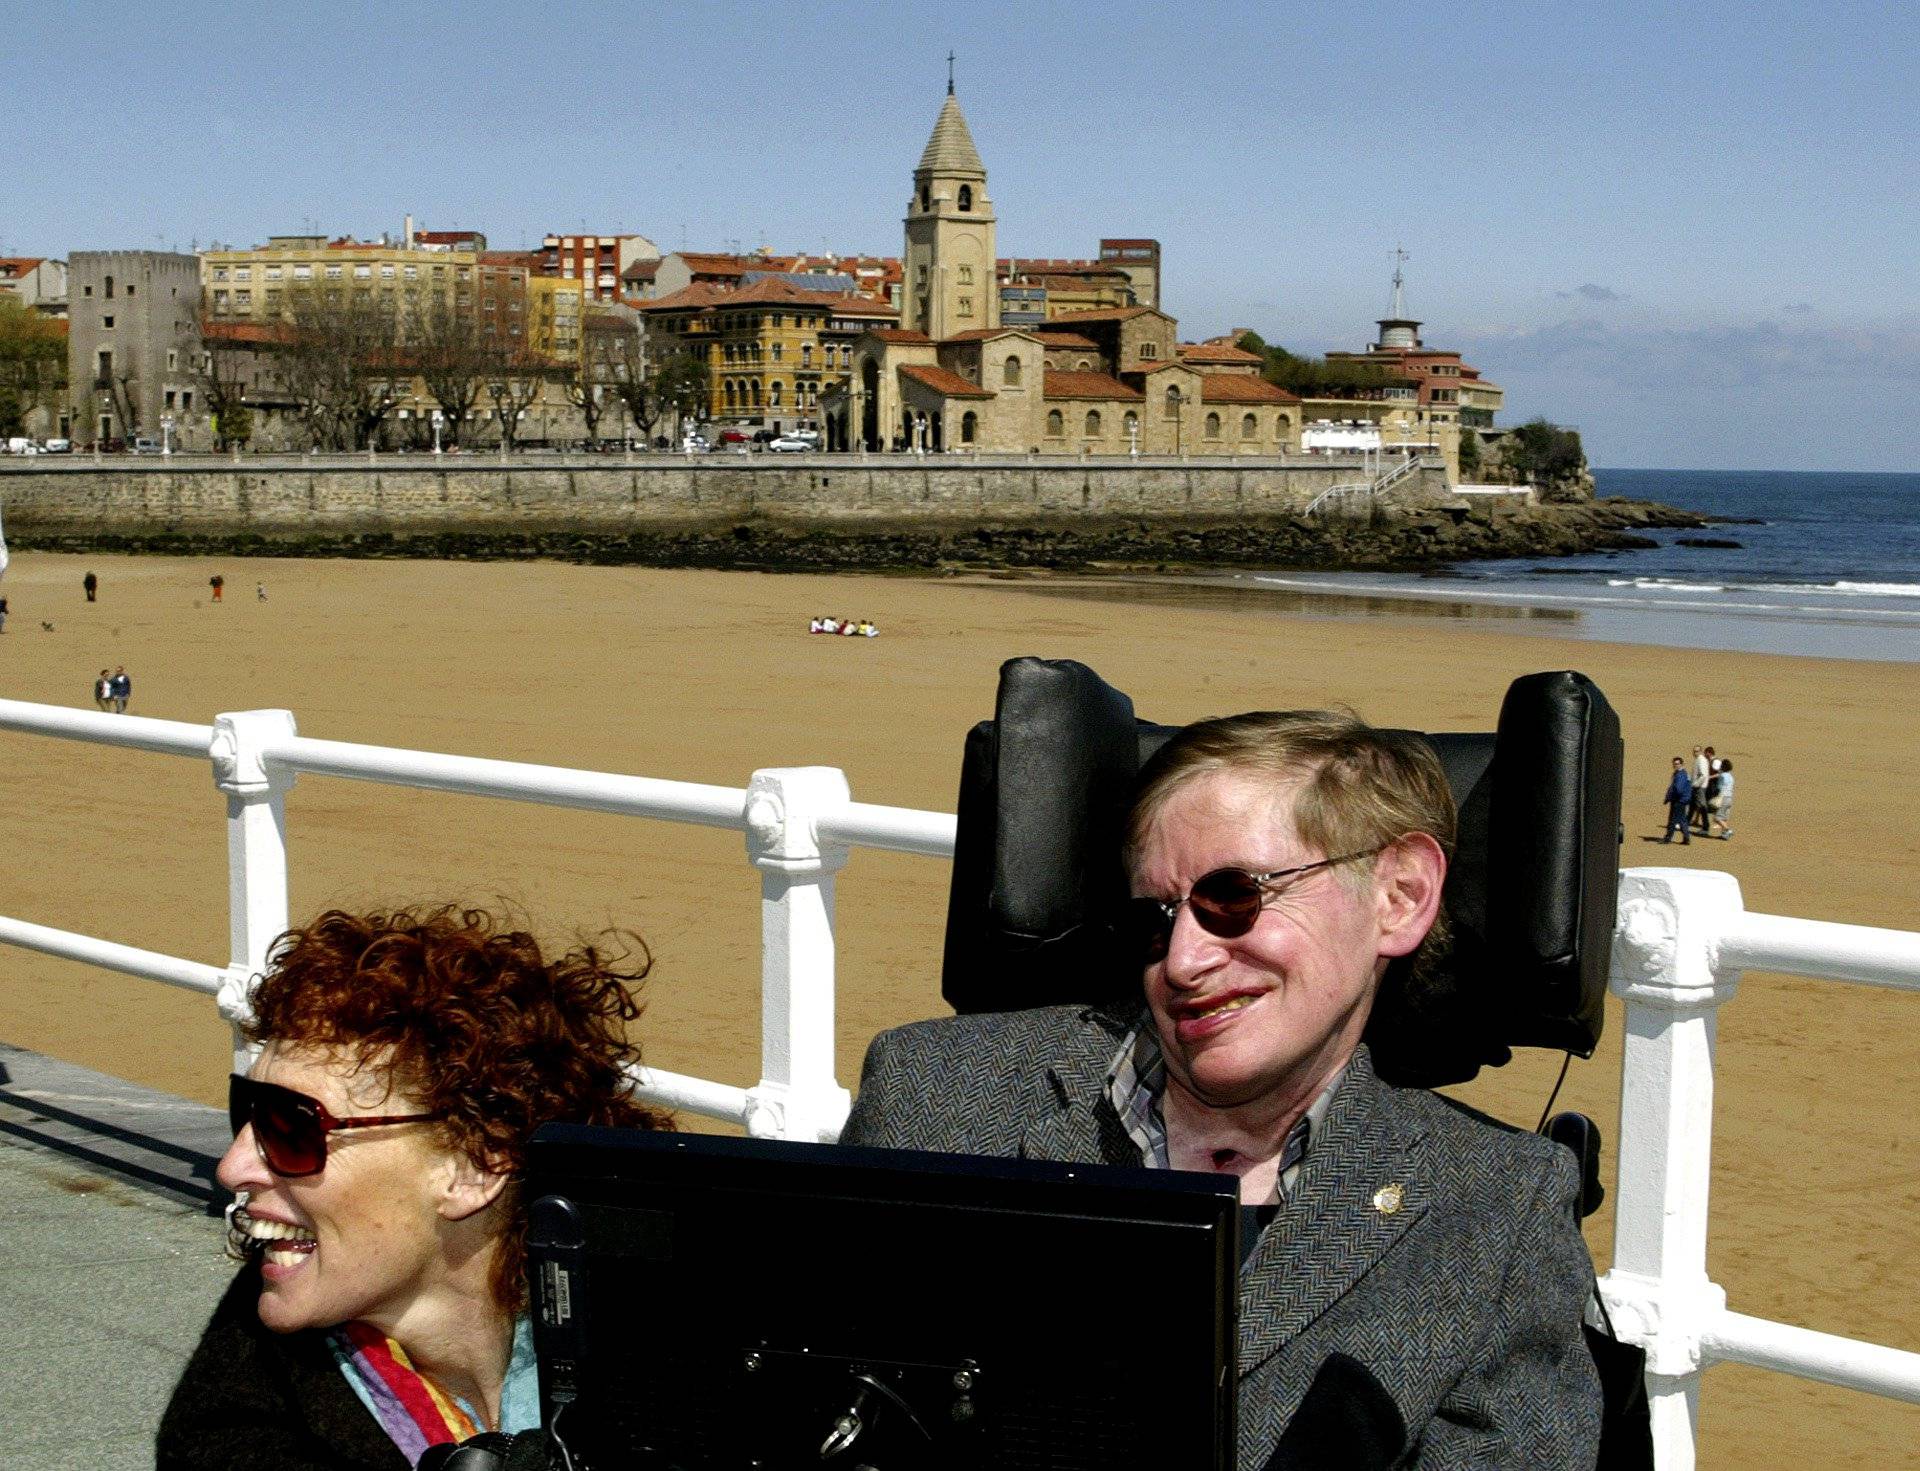 FILE PHOTO: British astrophysicist Hawking and his wife Elaine pose in front of a beach in Spain.